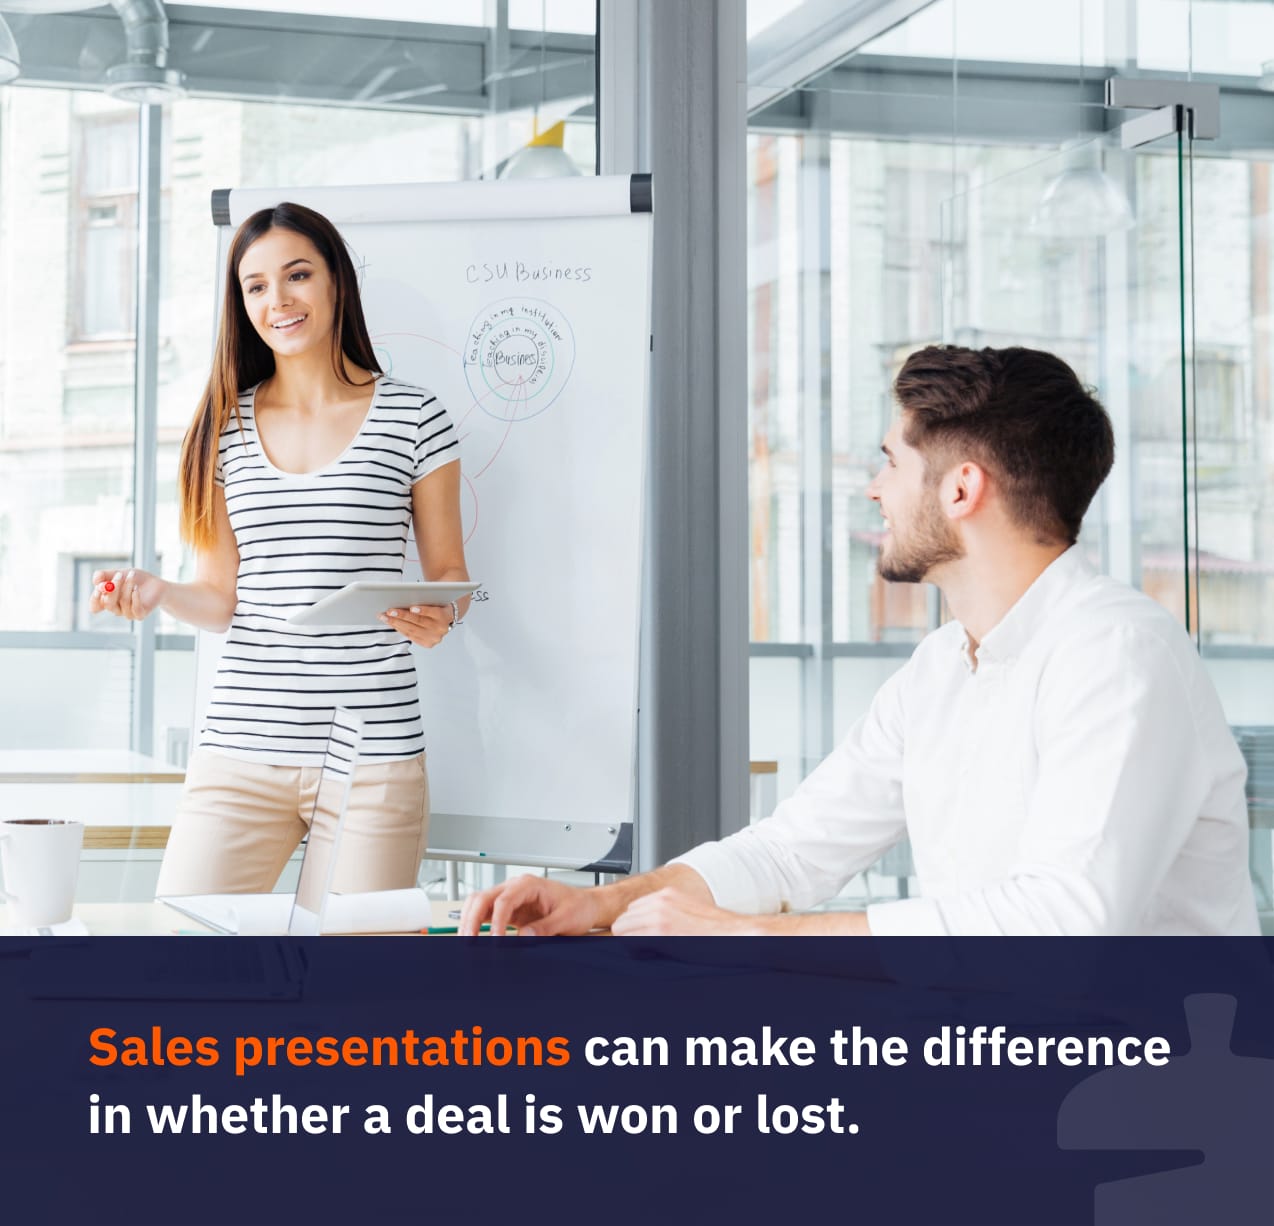 Sales presentations can make the difference in whether a deal is won